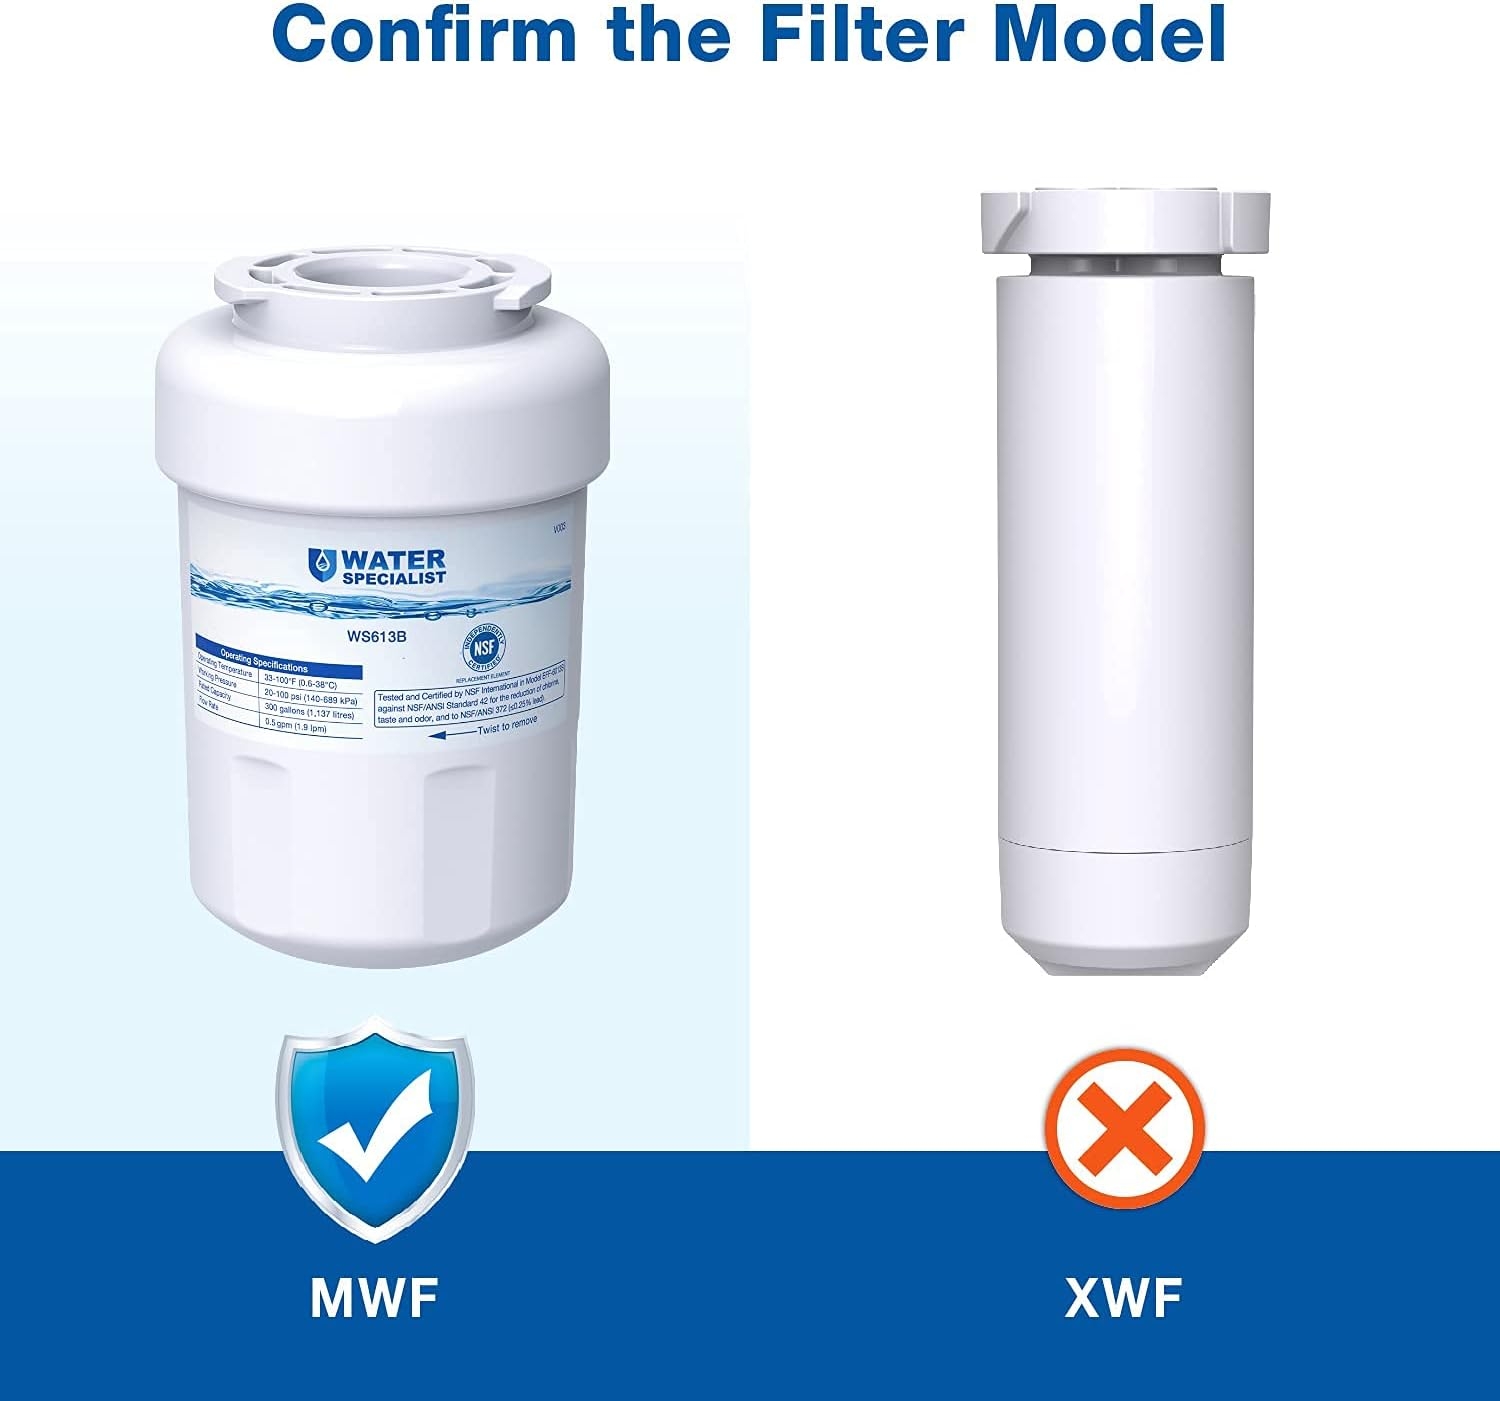 Waterspecialist NSF 53&42 Certified MWF Refrigerator Water Filter, Replacement for GE SmartWater MWFP , MWFA, GWF, HDX FMG-1, WFC1201, GSE25GSHECSS, PC75009, RWF1060, 197D6321P006 (Pack of 3)